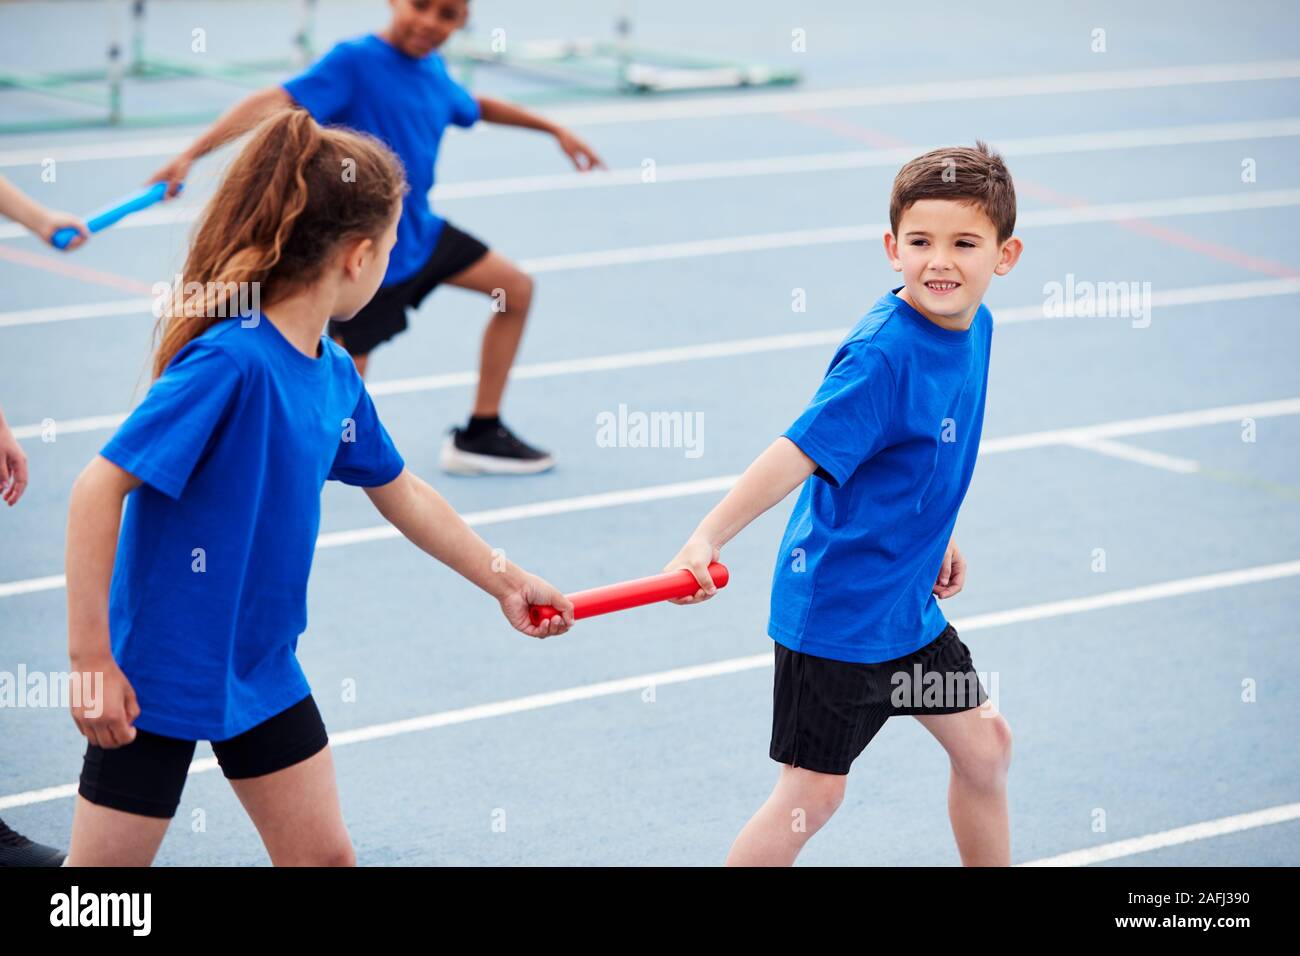 Children In Athletics Team Competing In Relay Race On Sports Day Stock Photo